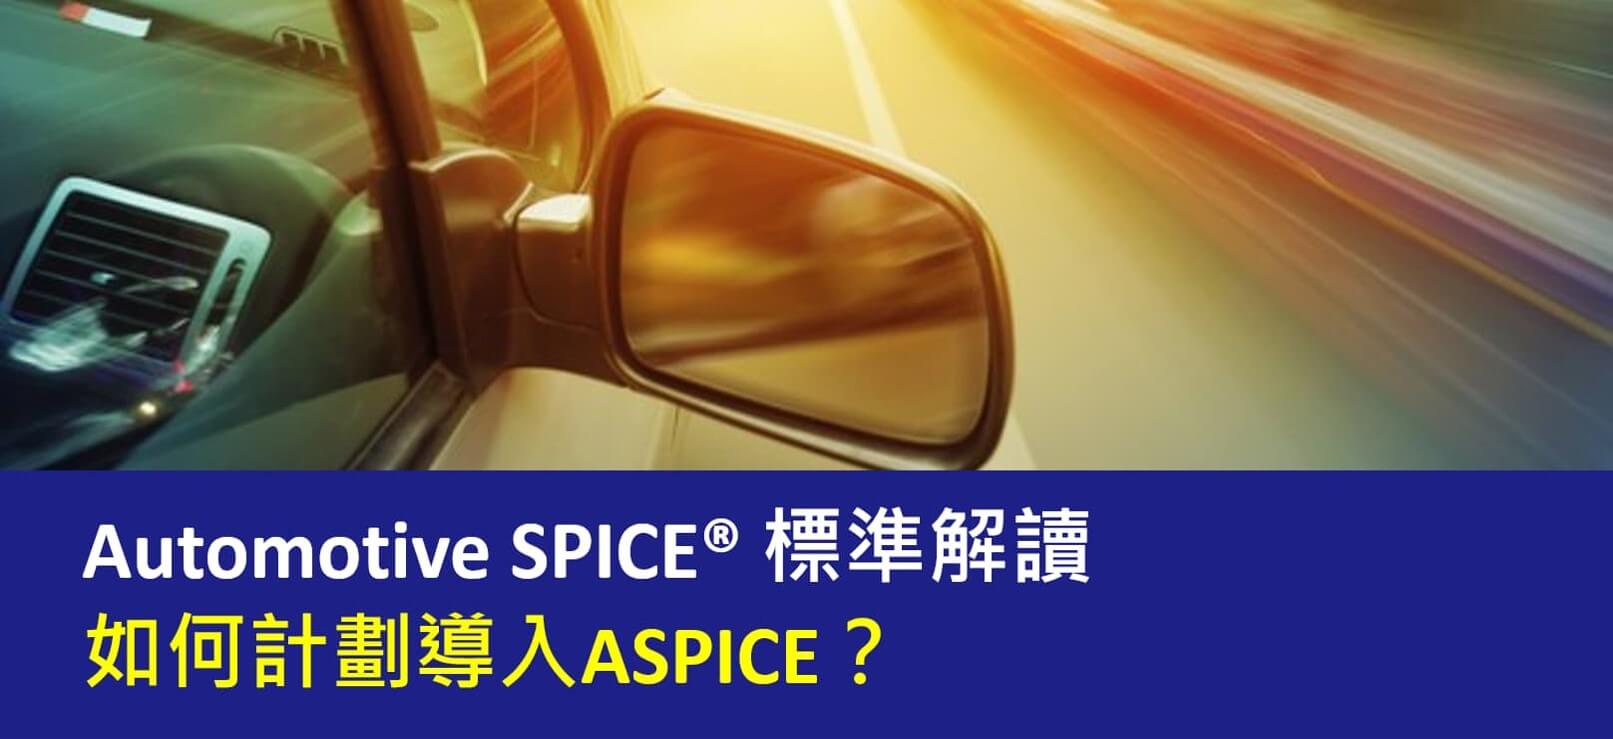 how to implement ASPICE